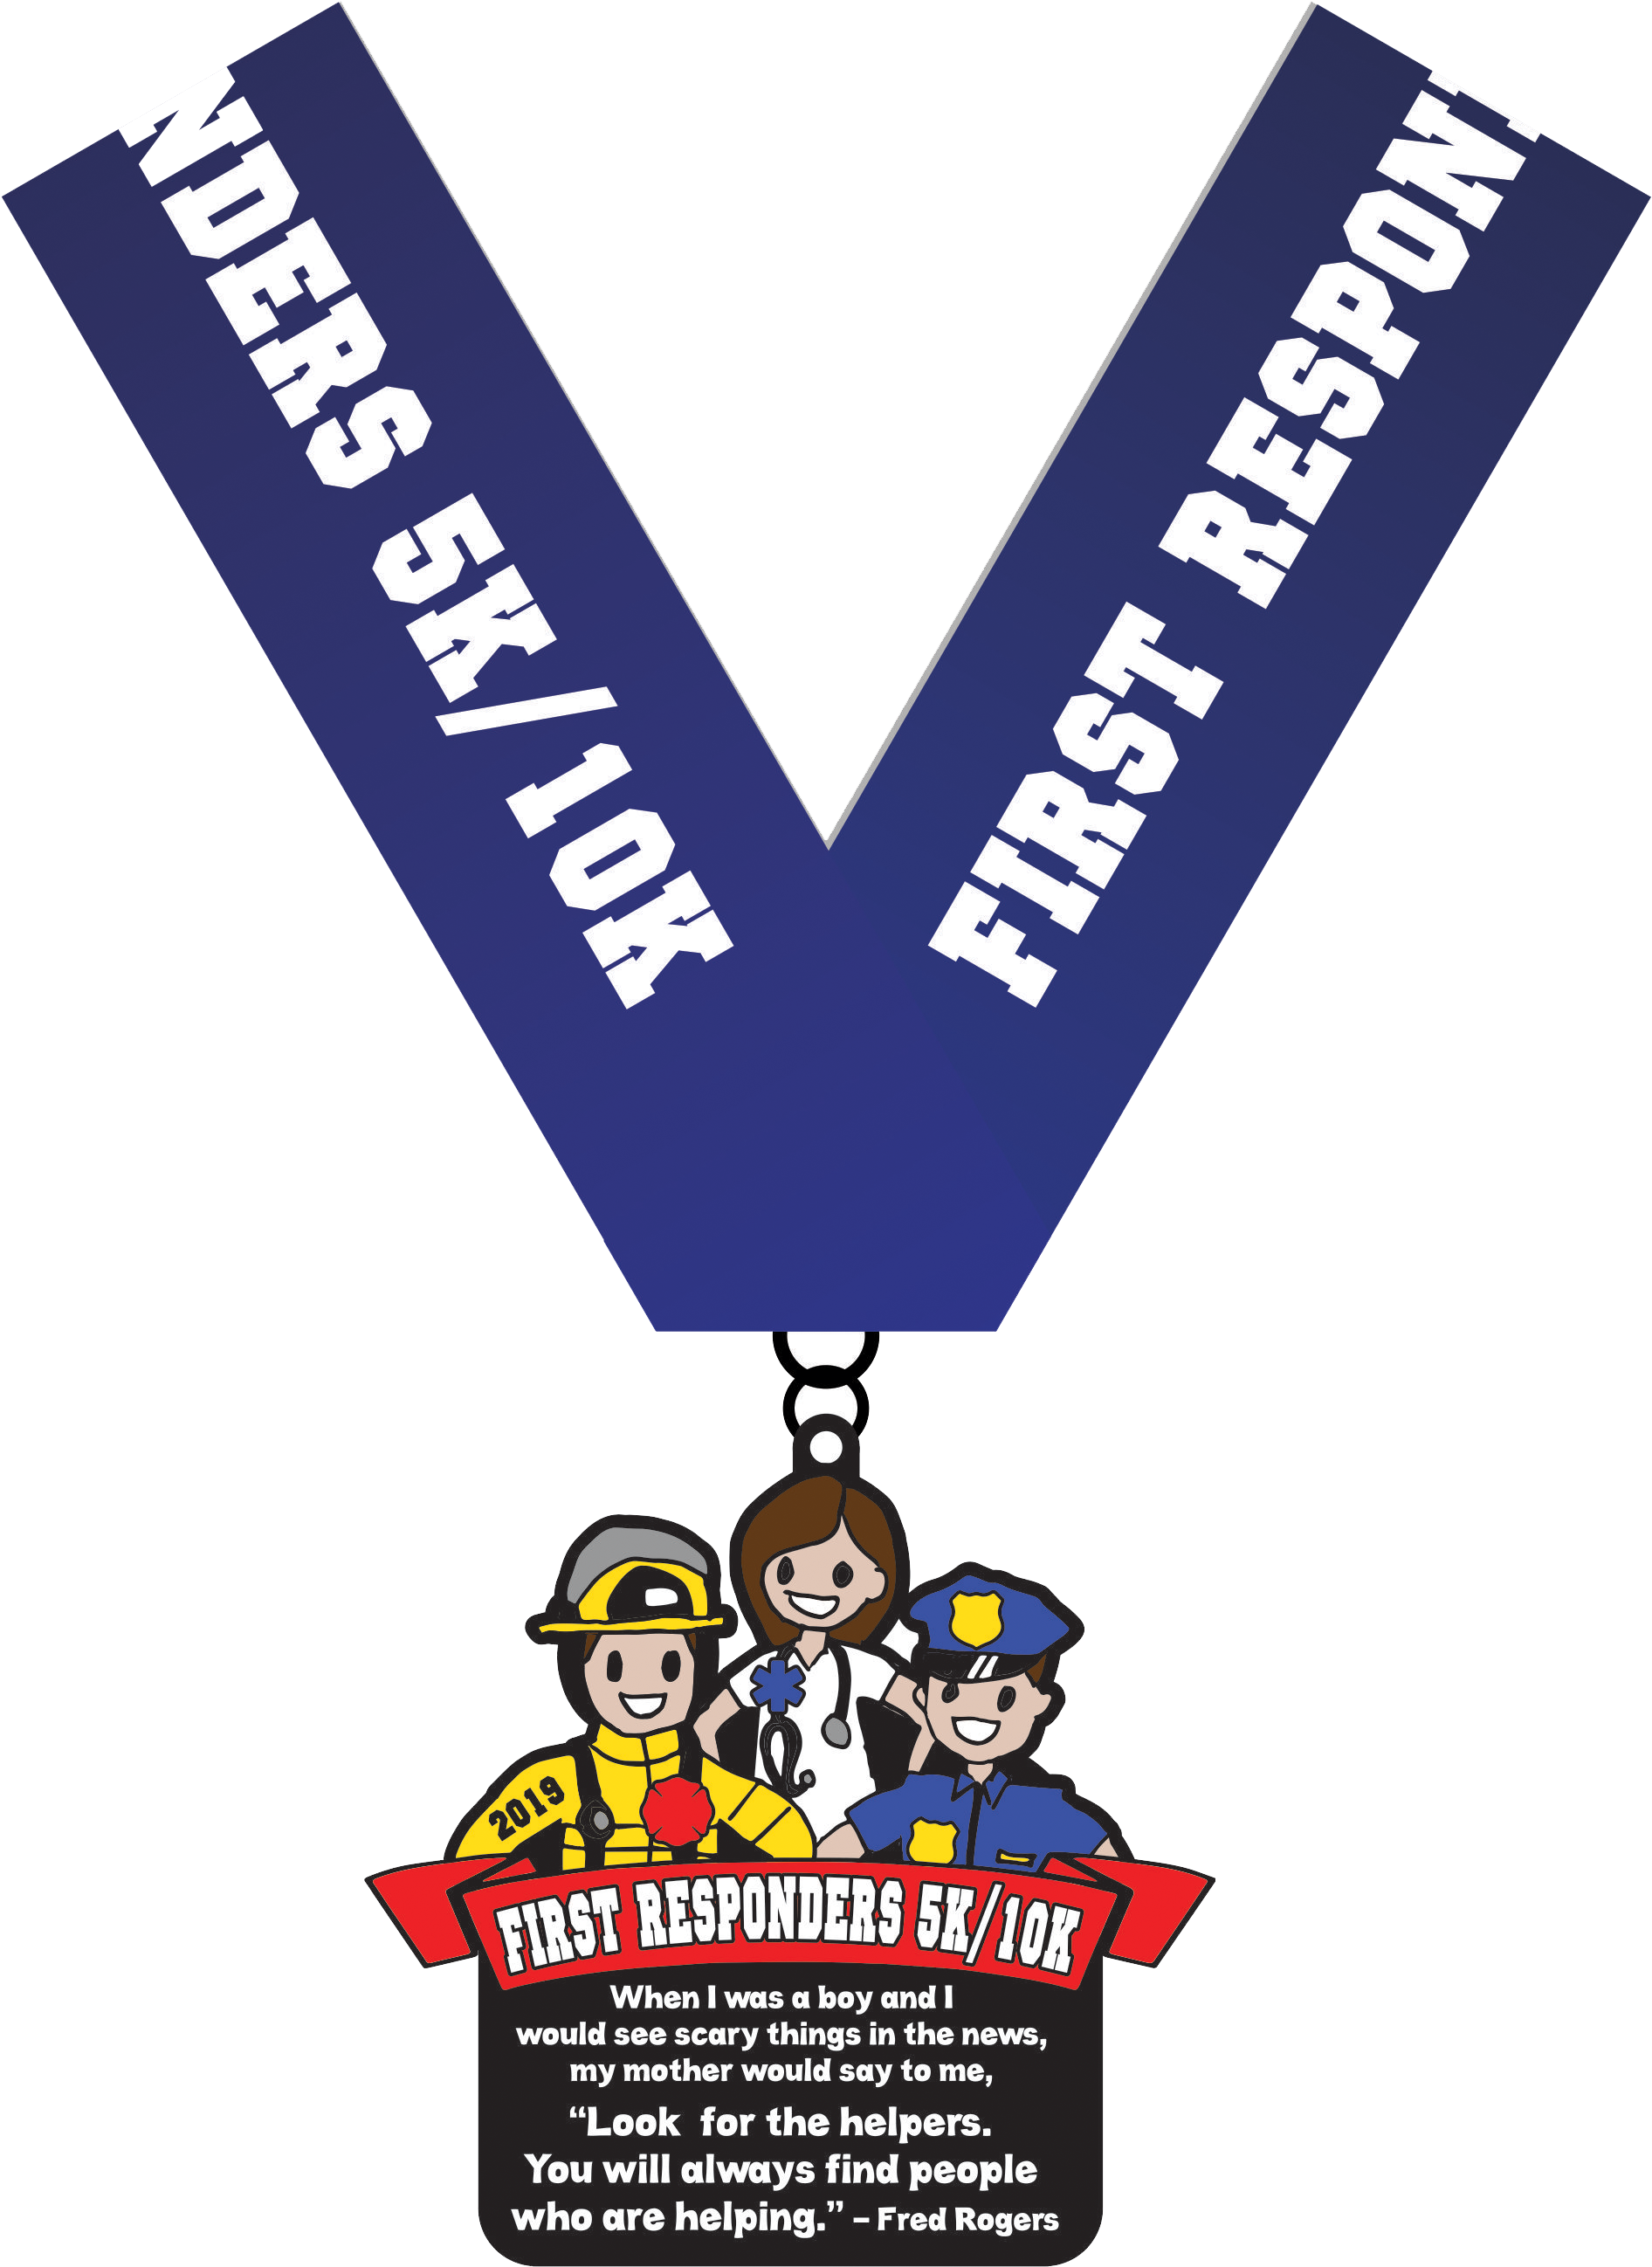 Only $9! First Responders 5K & 10K - San Diego